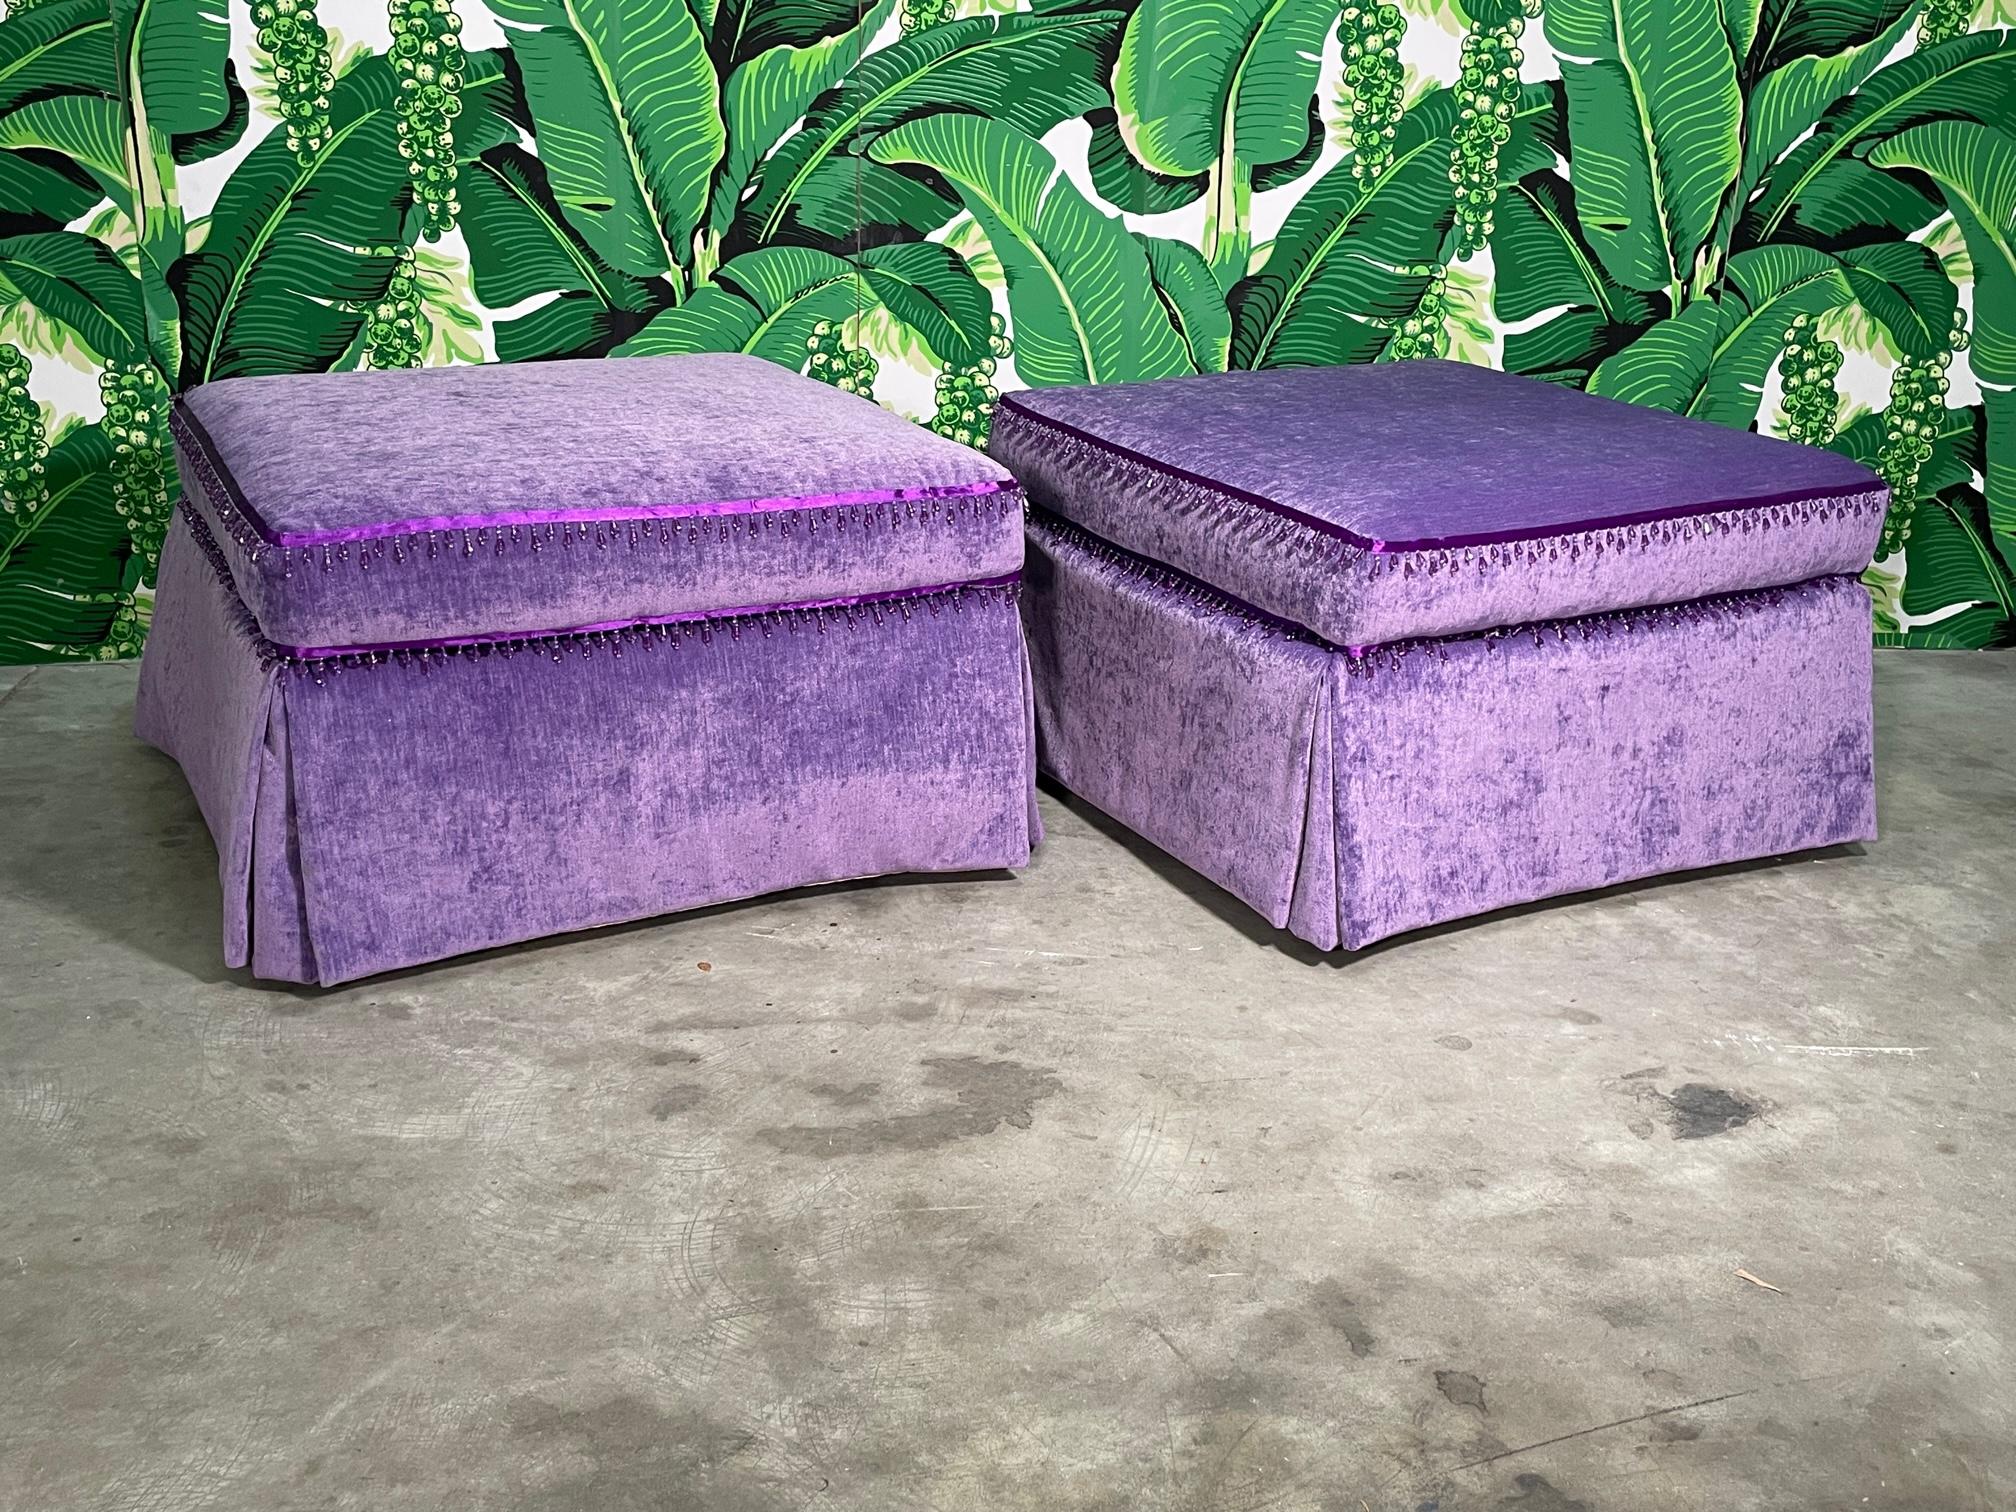 Pair of Hollywood Regency style ottomans upholstered in a soft, velvet like fabric. Very good condition with minor imperfections consistent with age. May exhibit scuffs, marks, or wear, see photos for details.
For a shipping quote to your exact zip